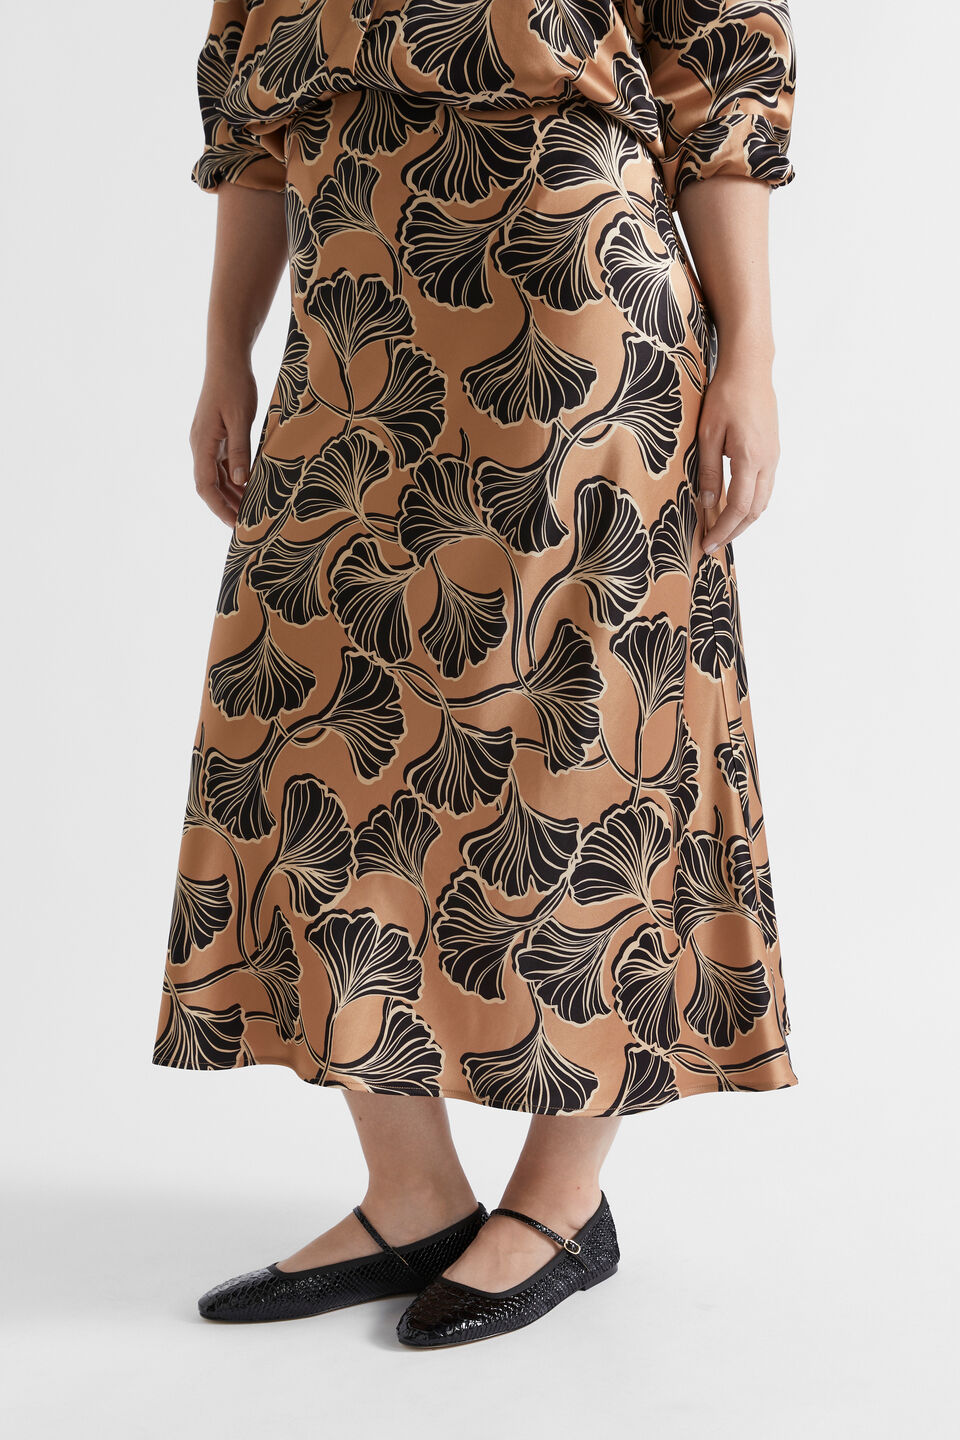 Satin Abstract Floral Skirt  Abstract Floral